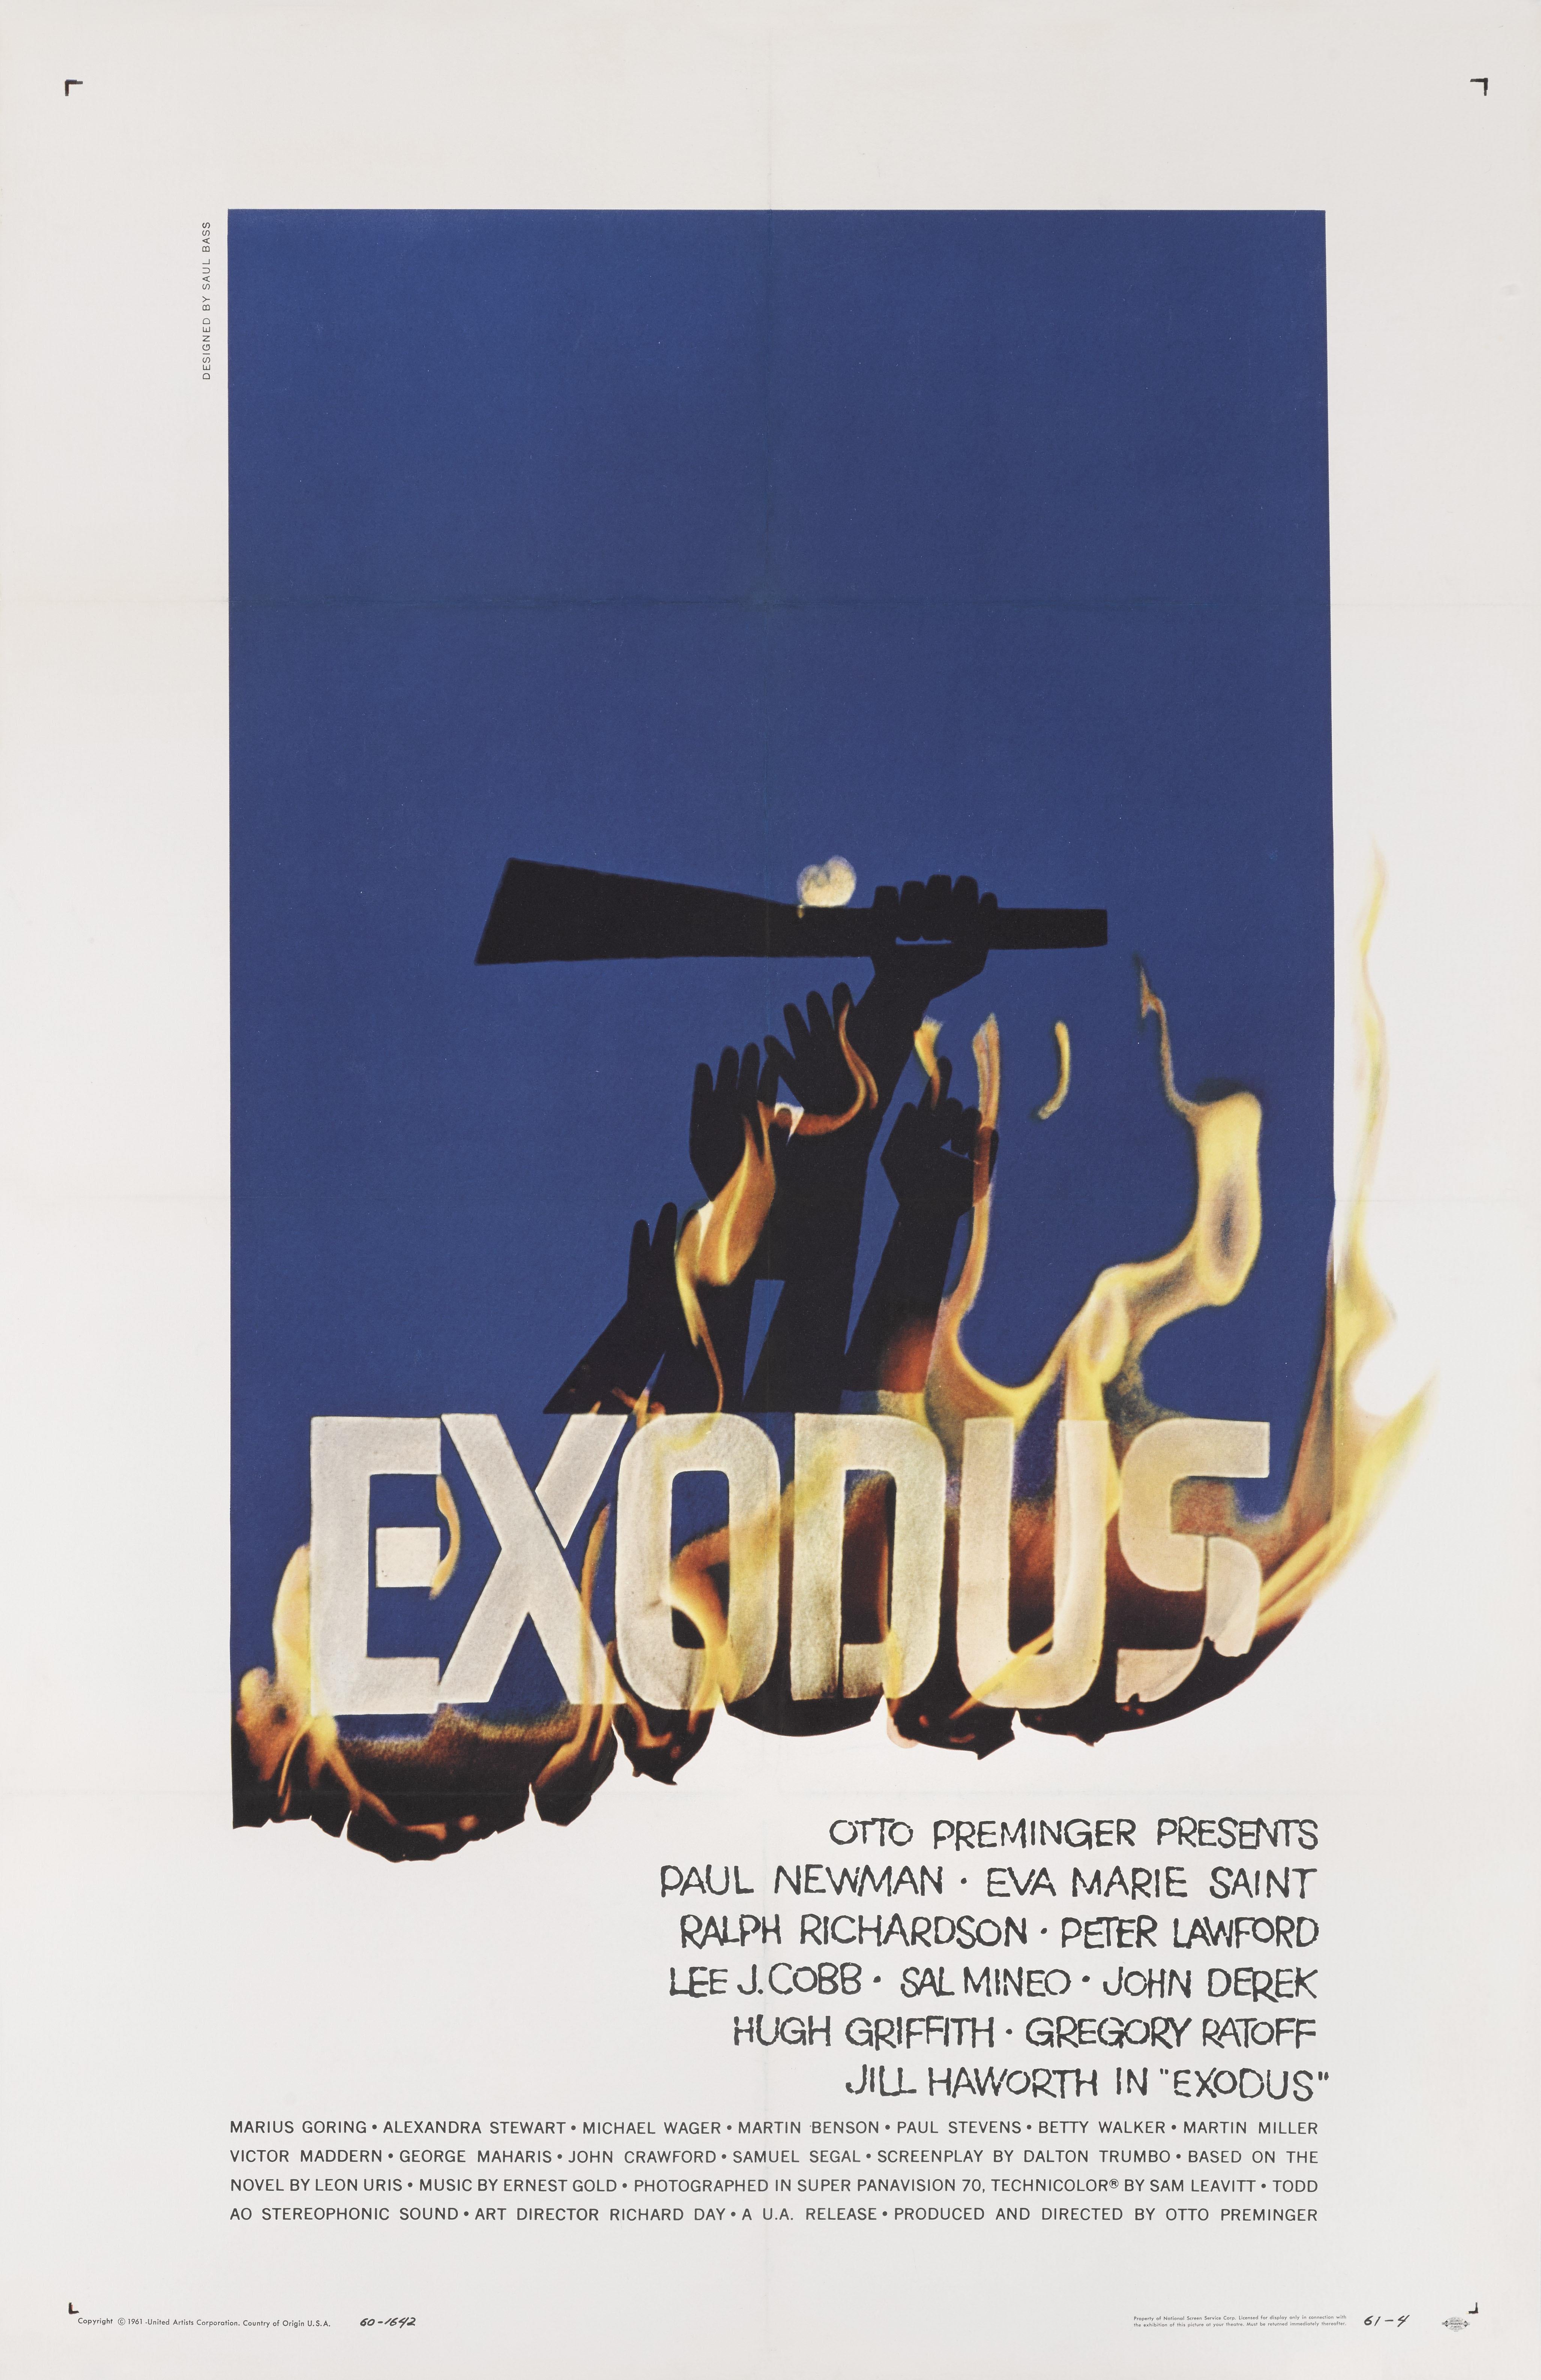 Original US movie poster for Otto Preminger's 1960 drama directed by Paul Newman.
The art work is by the legendary American graphic artist Saul Bass (1920-1996).
This poster is conservation linen backed and would be shipped rolled in a strong